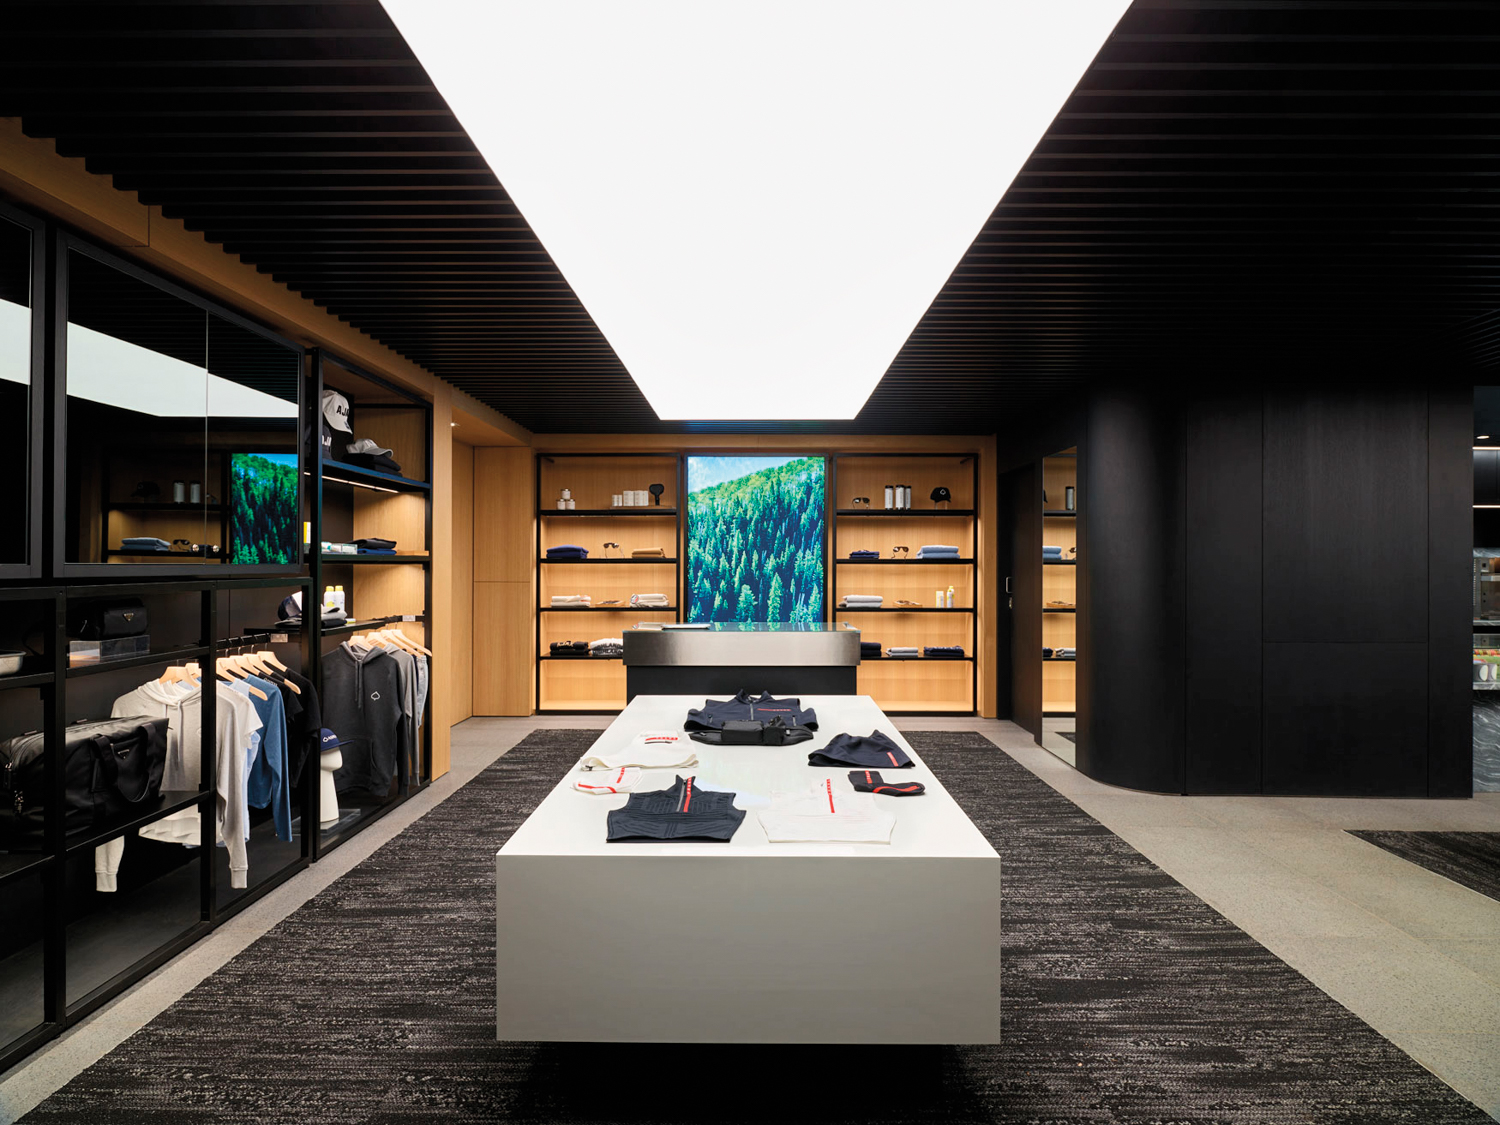 Interior of AspenX store with a dark-gray rug, white Island with clothes on display and shelving